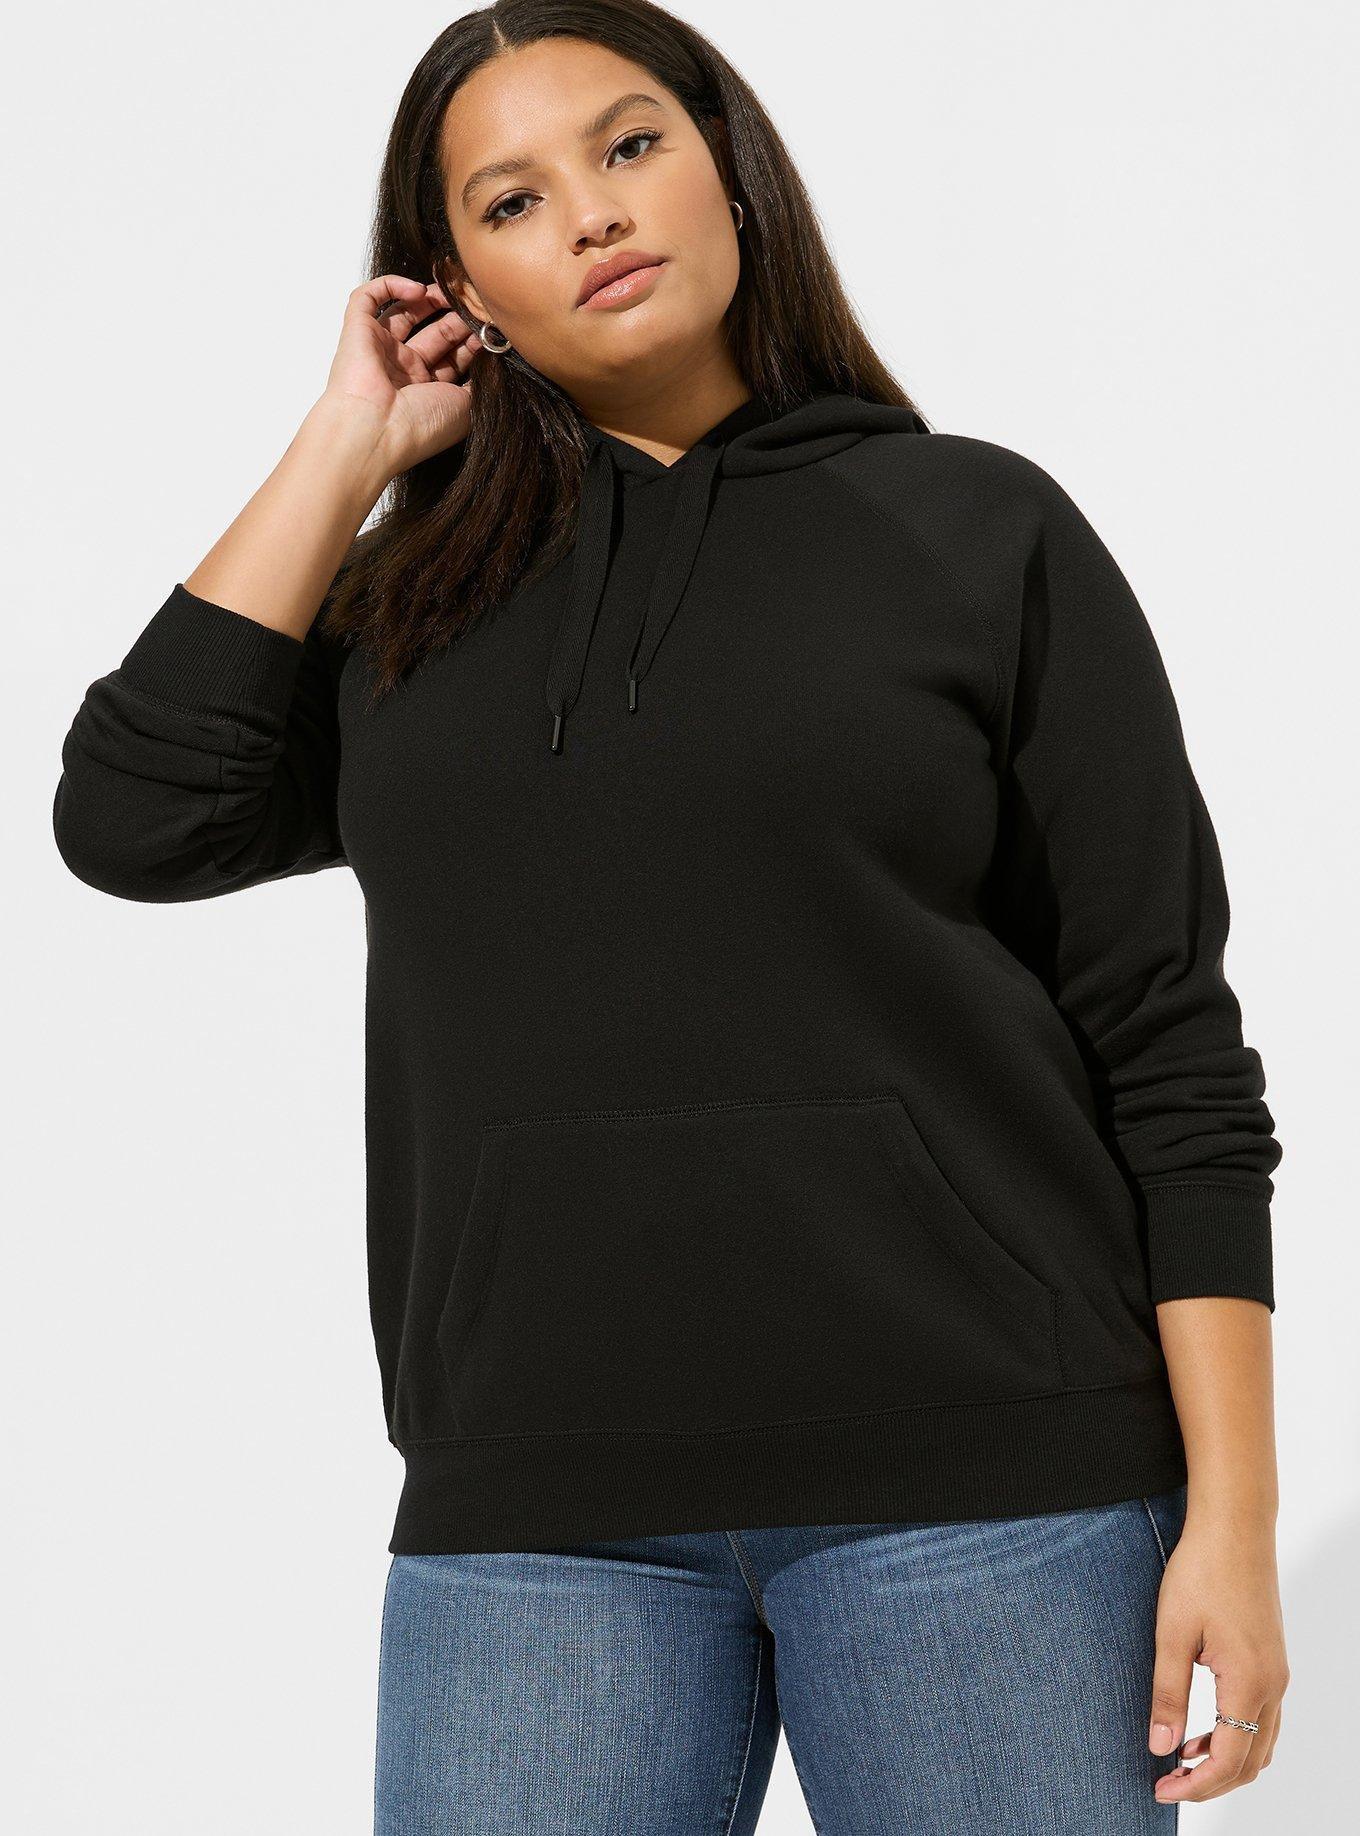 Just a Small Town Girl Sweatshirt Plus Size Clothing Available Cute Cozy  Sweatshirt for Women -  Canada